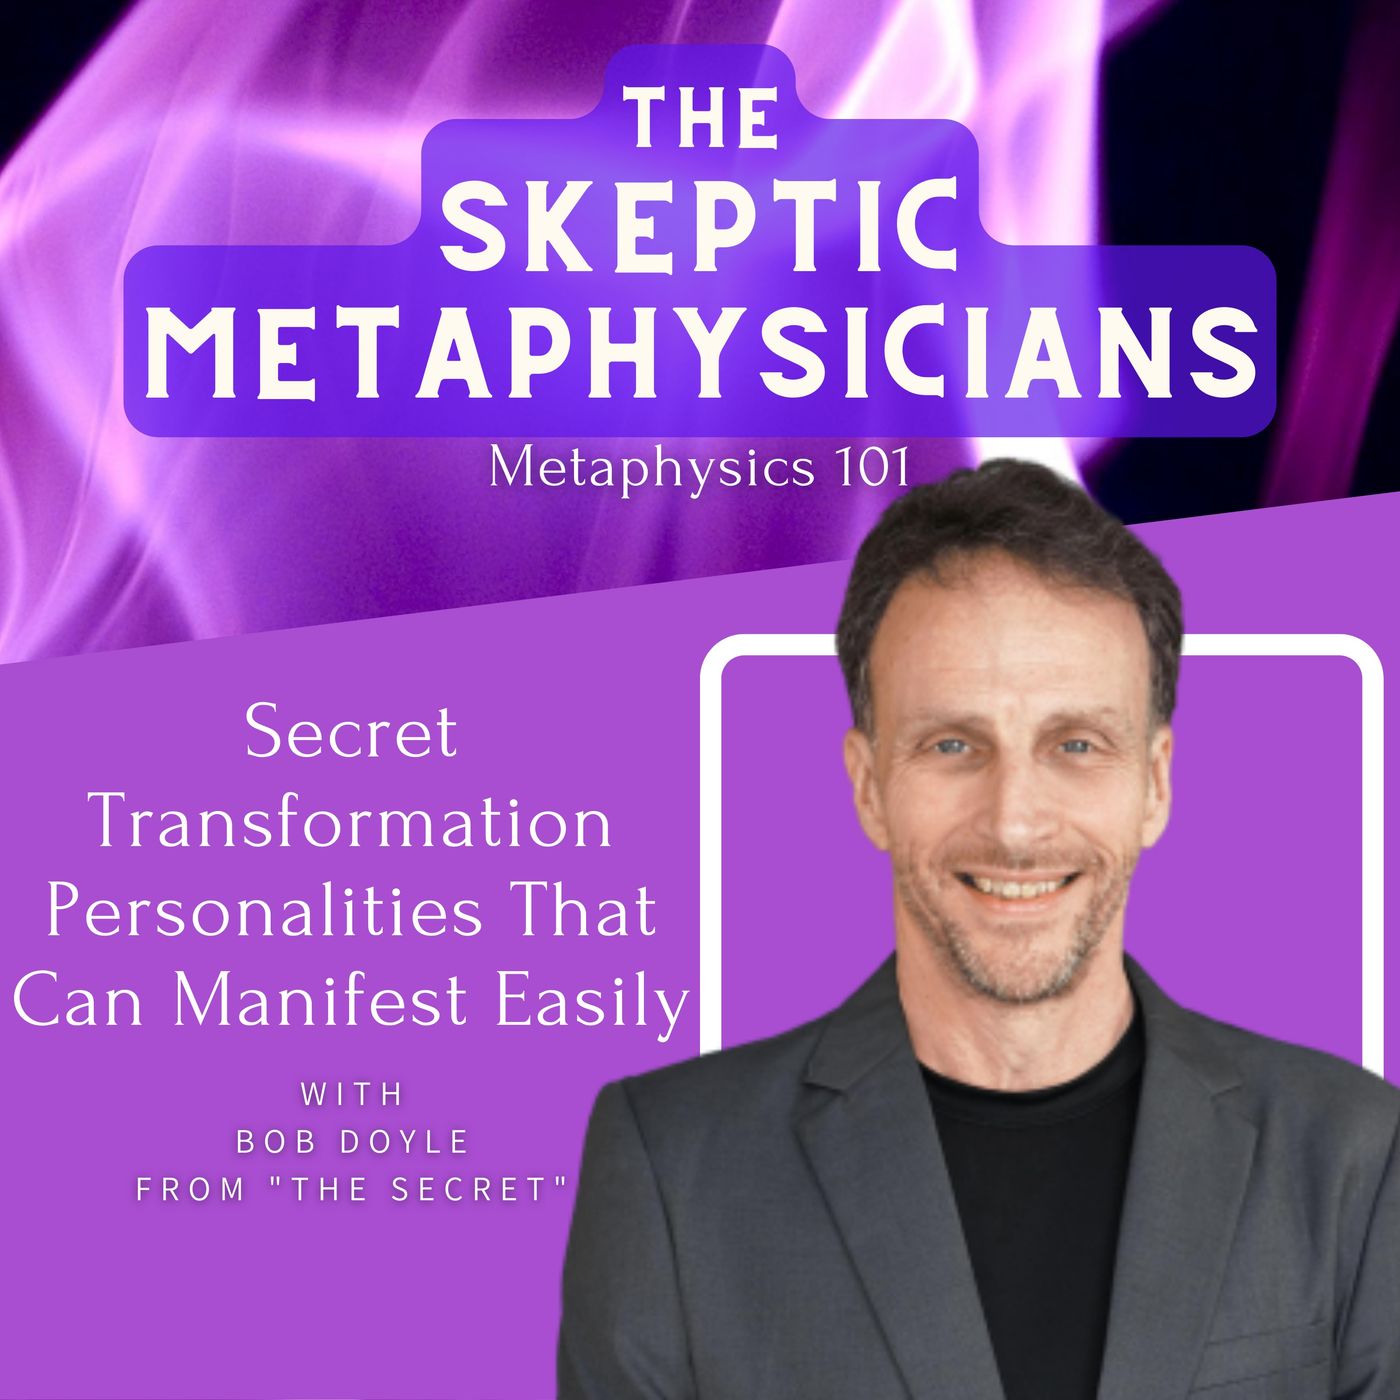 Secret Transformation Personalities That Can Manifest Easily | Bob Doyle